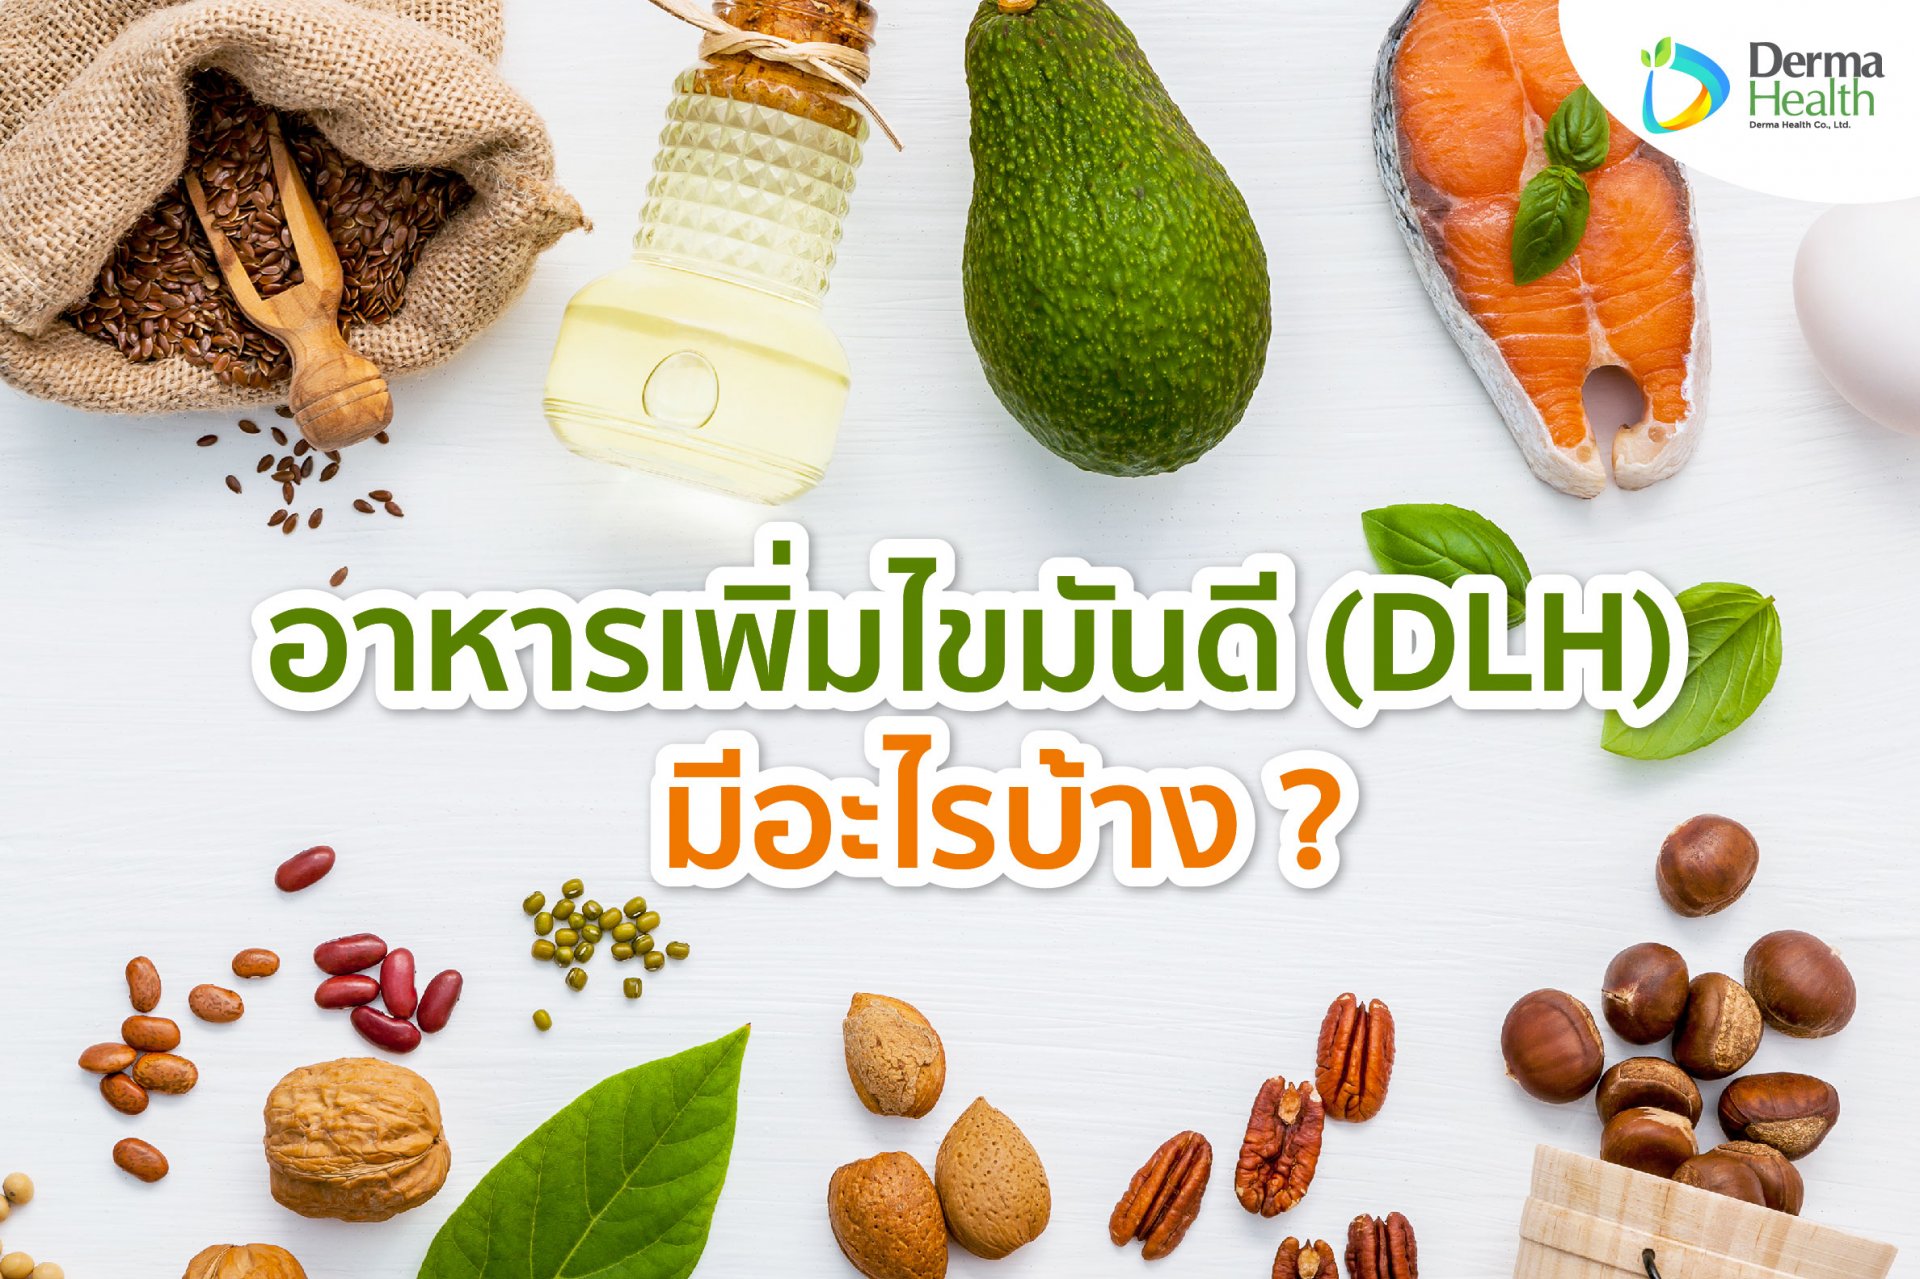 What are foods that increase good fat (DLH)?